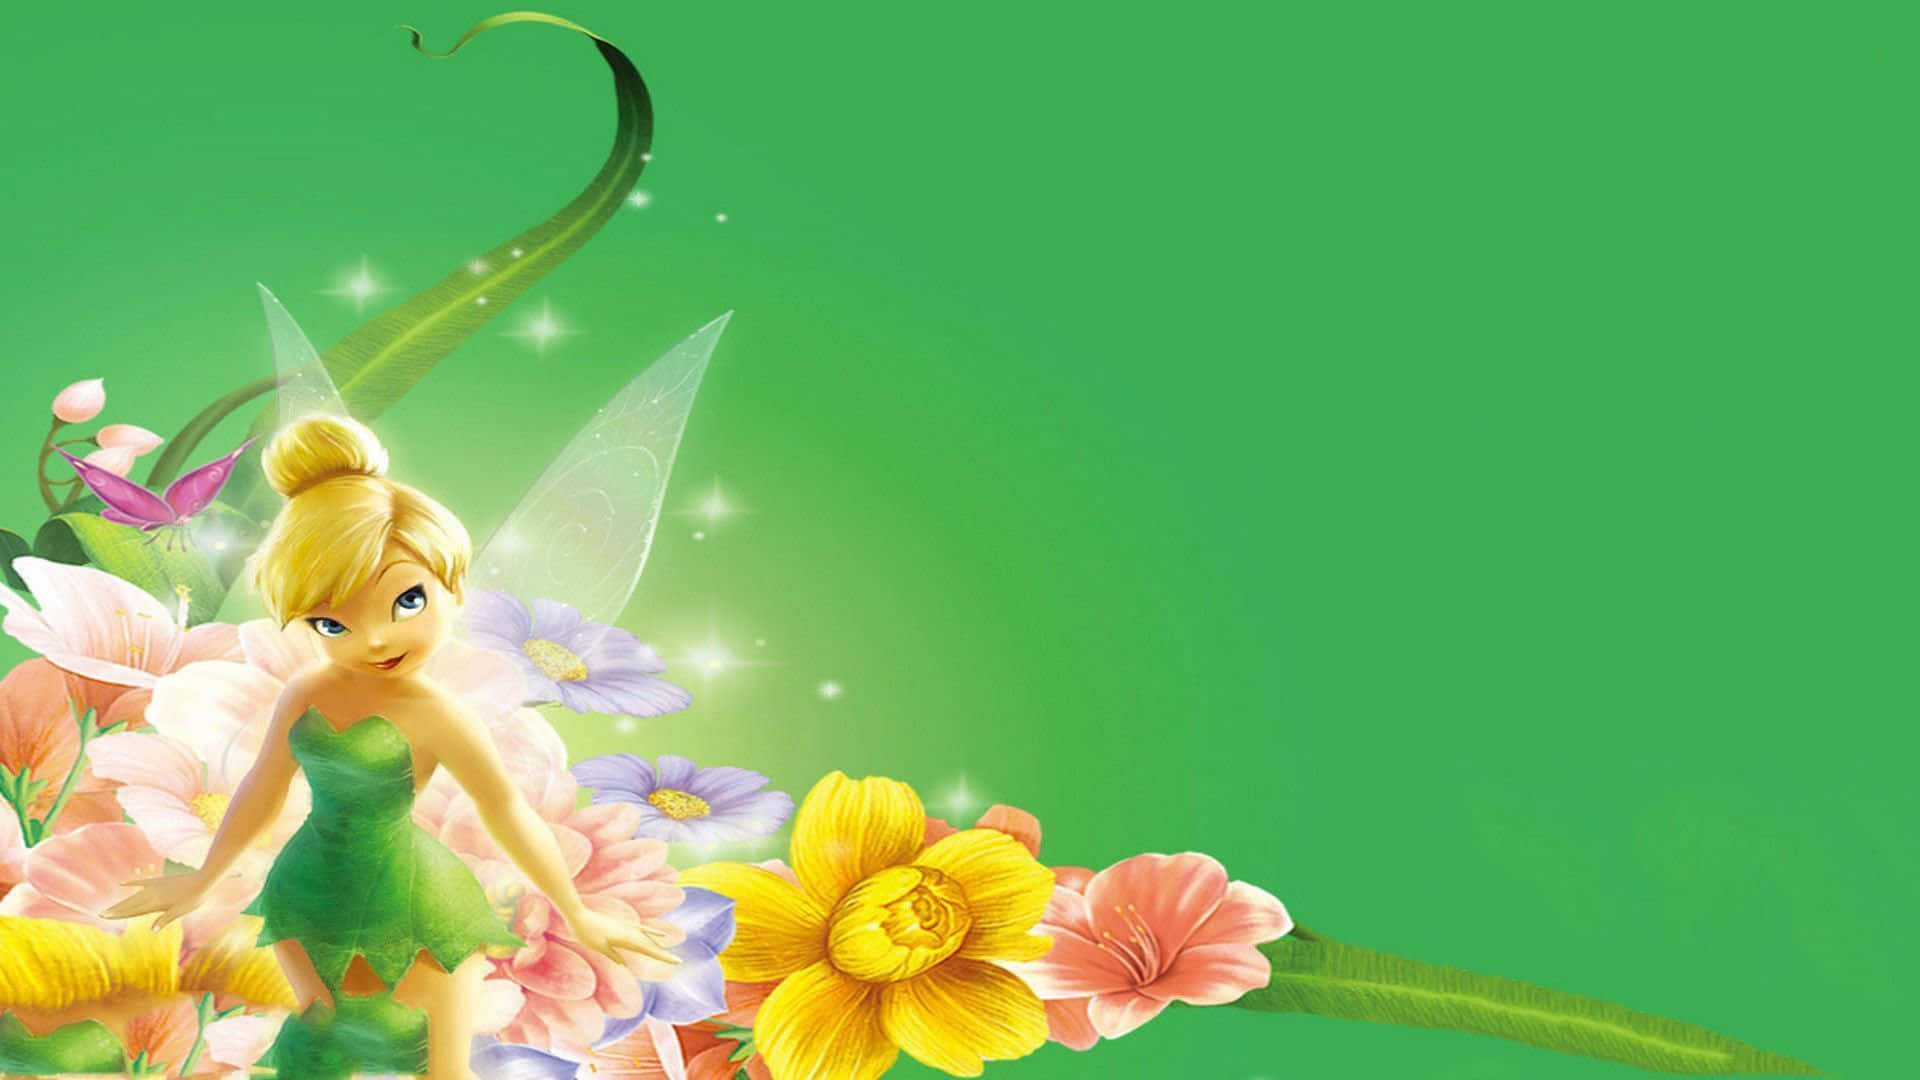 Magical Tinkerbell surrounded by pixie dust